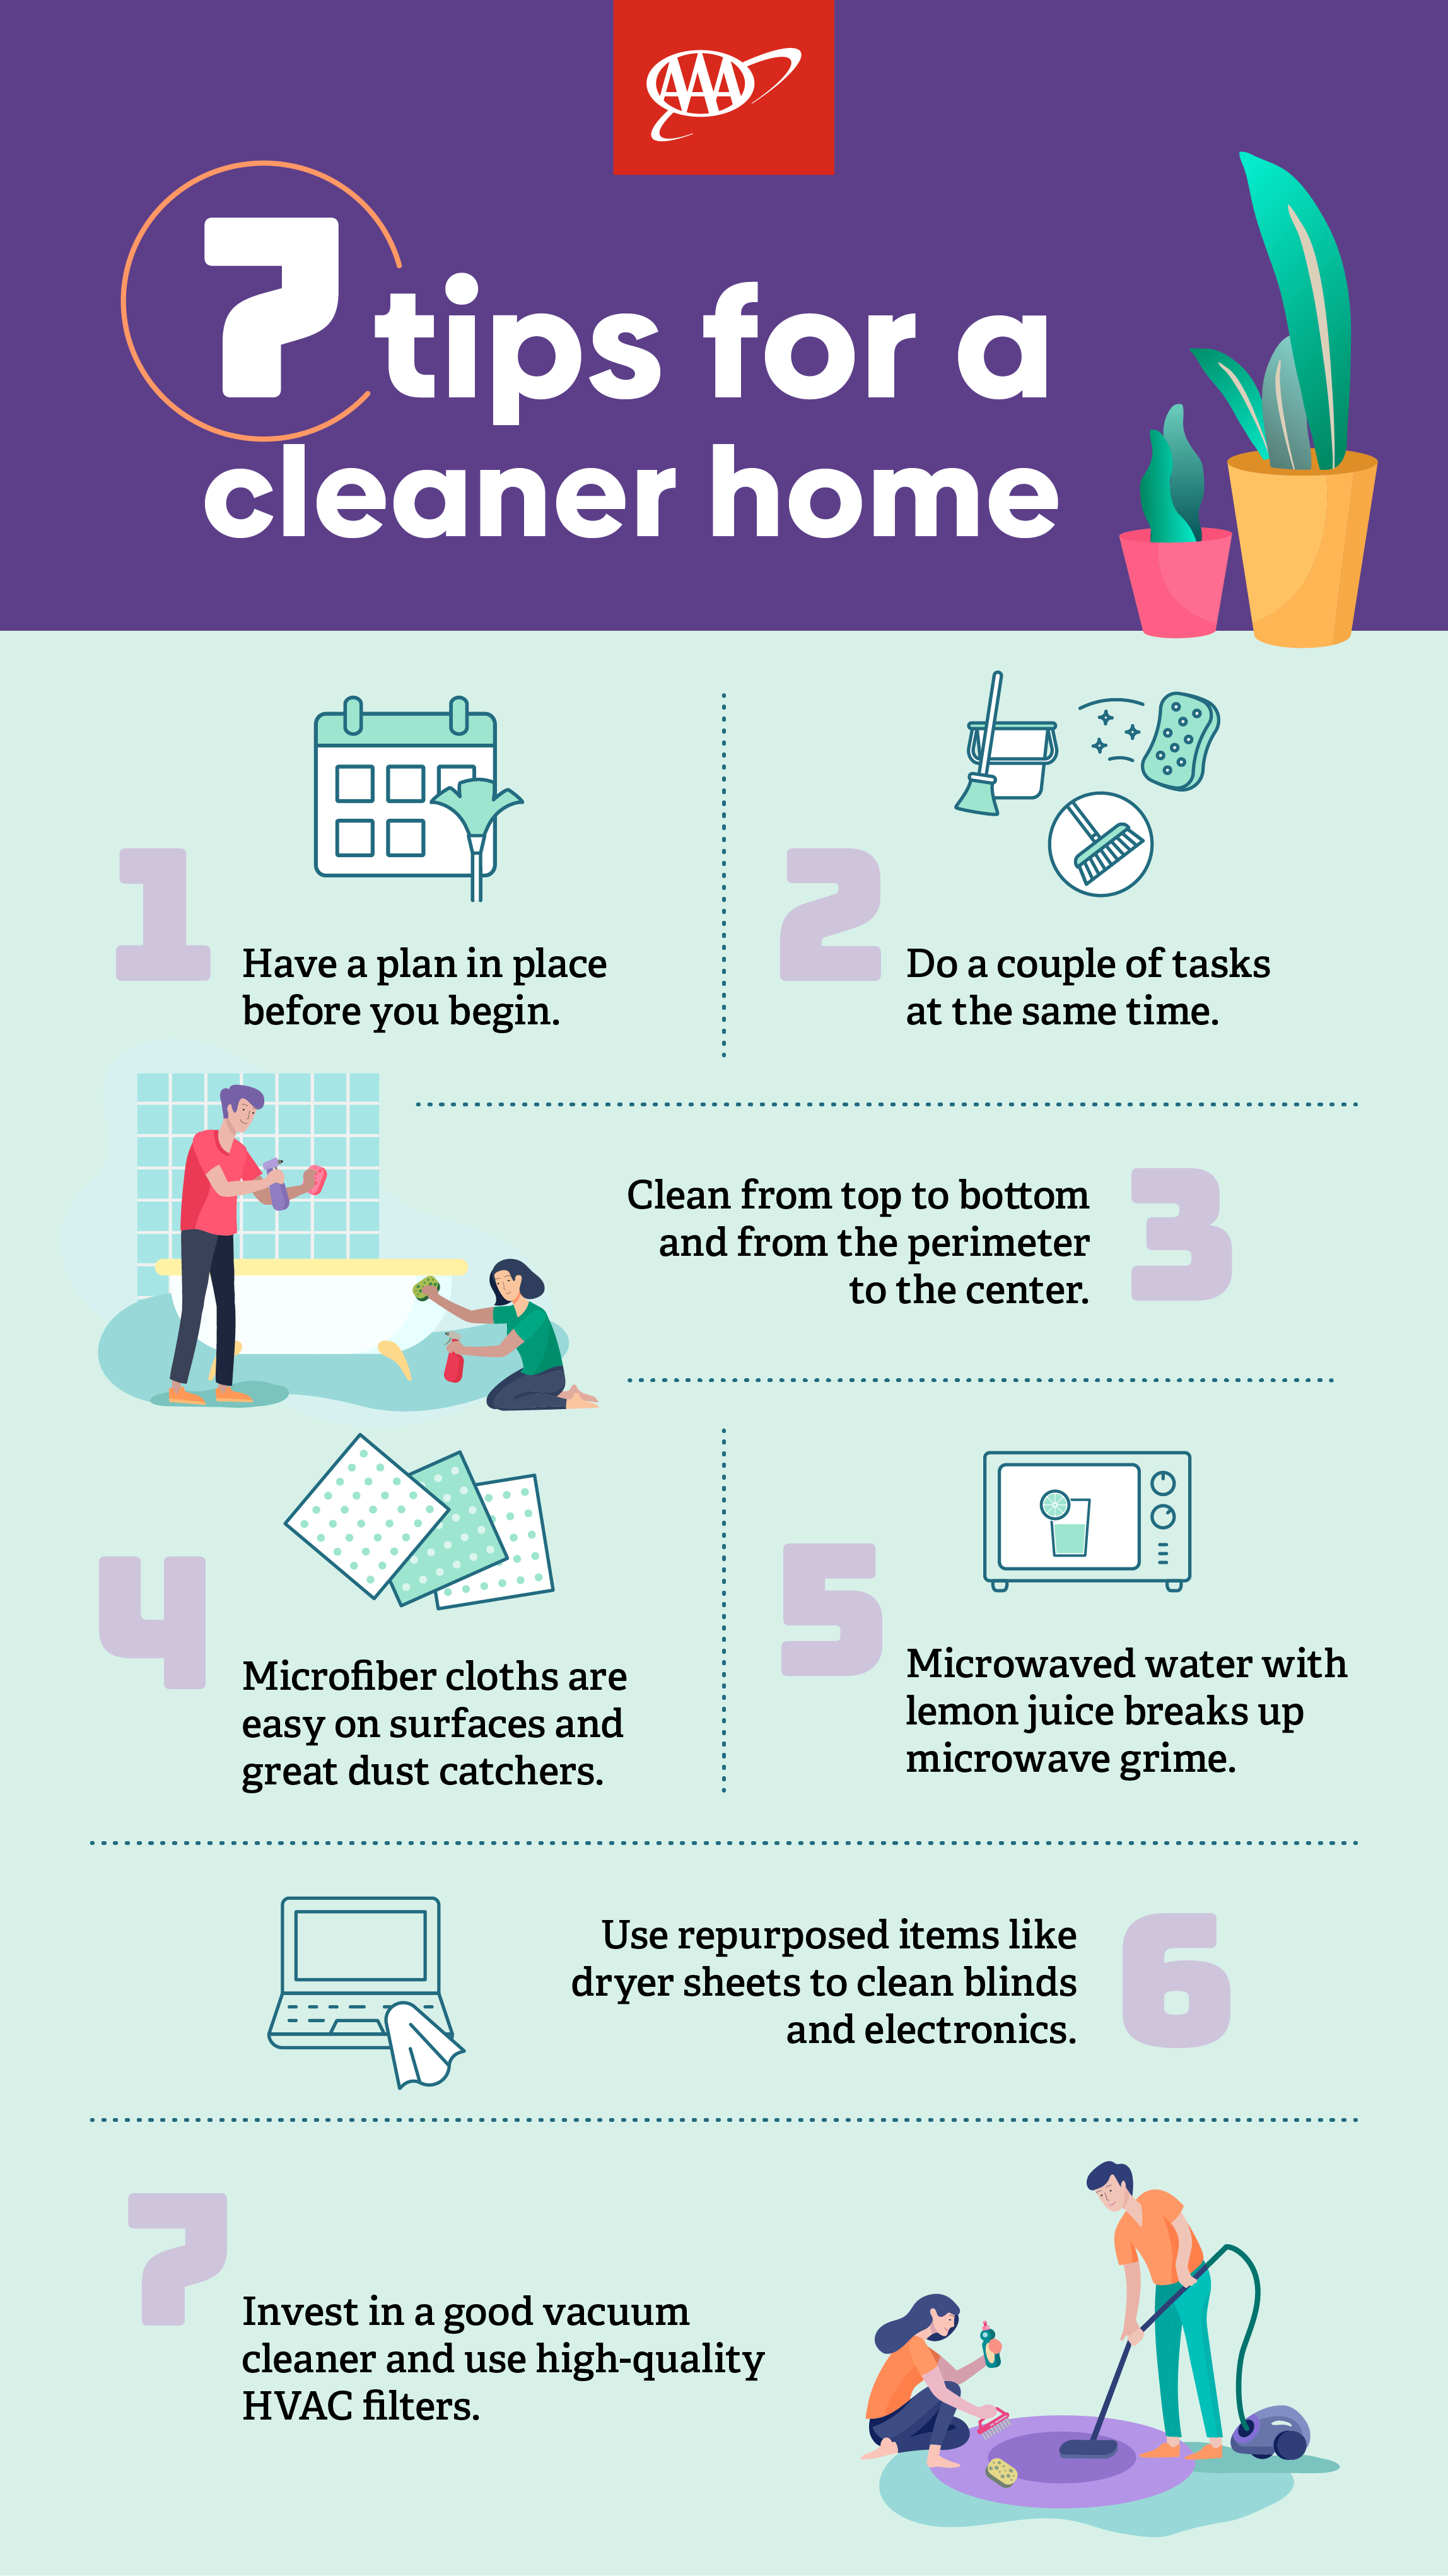 AAA infographic on home cleaning tips